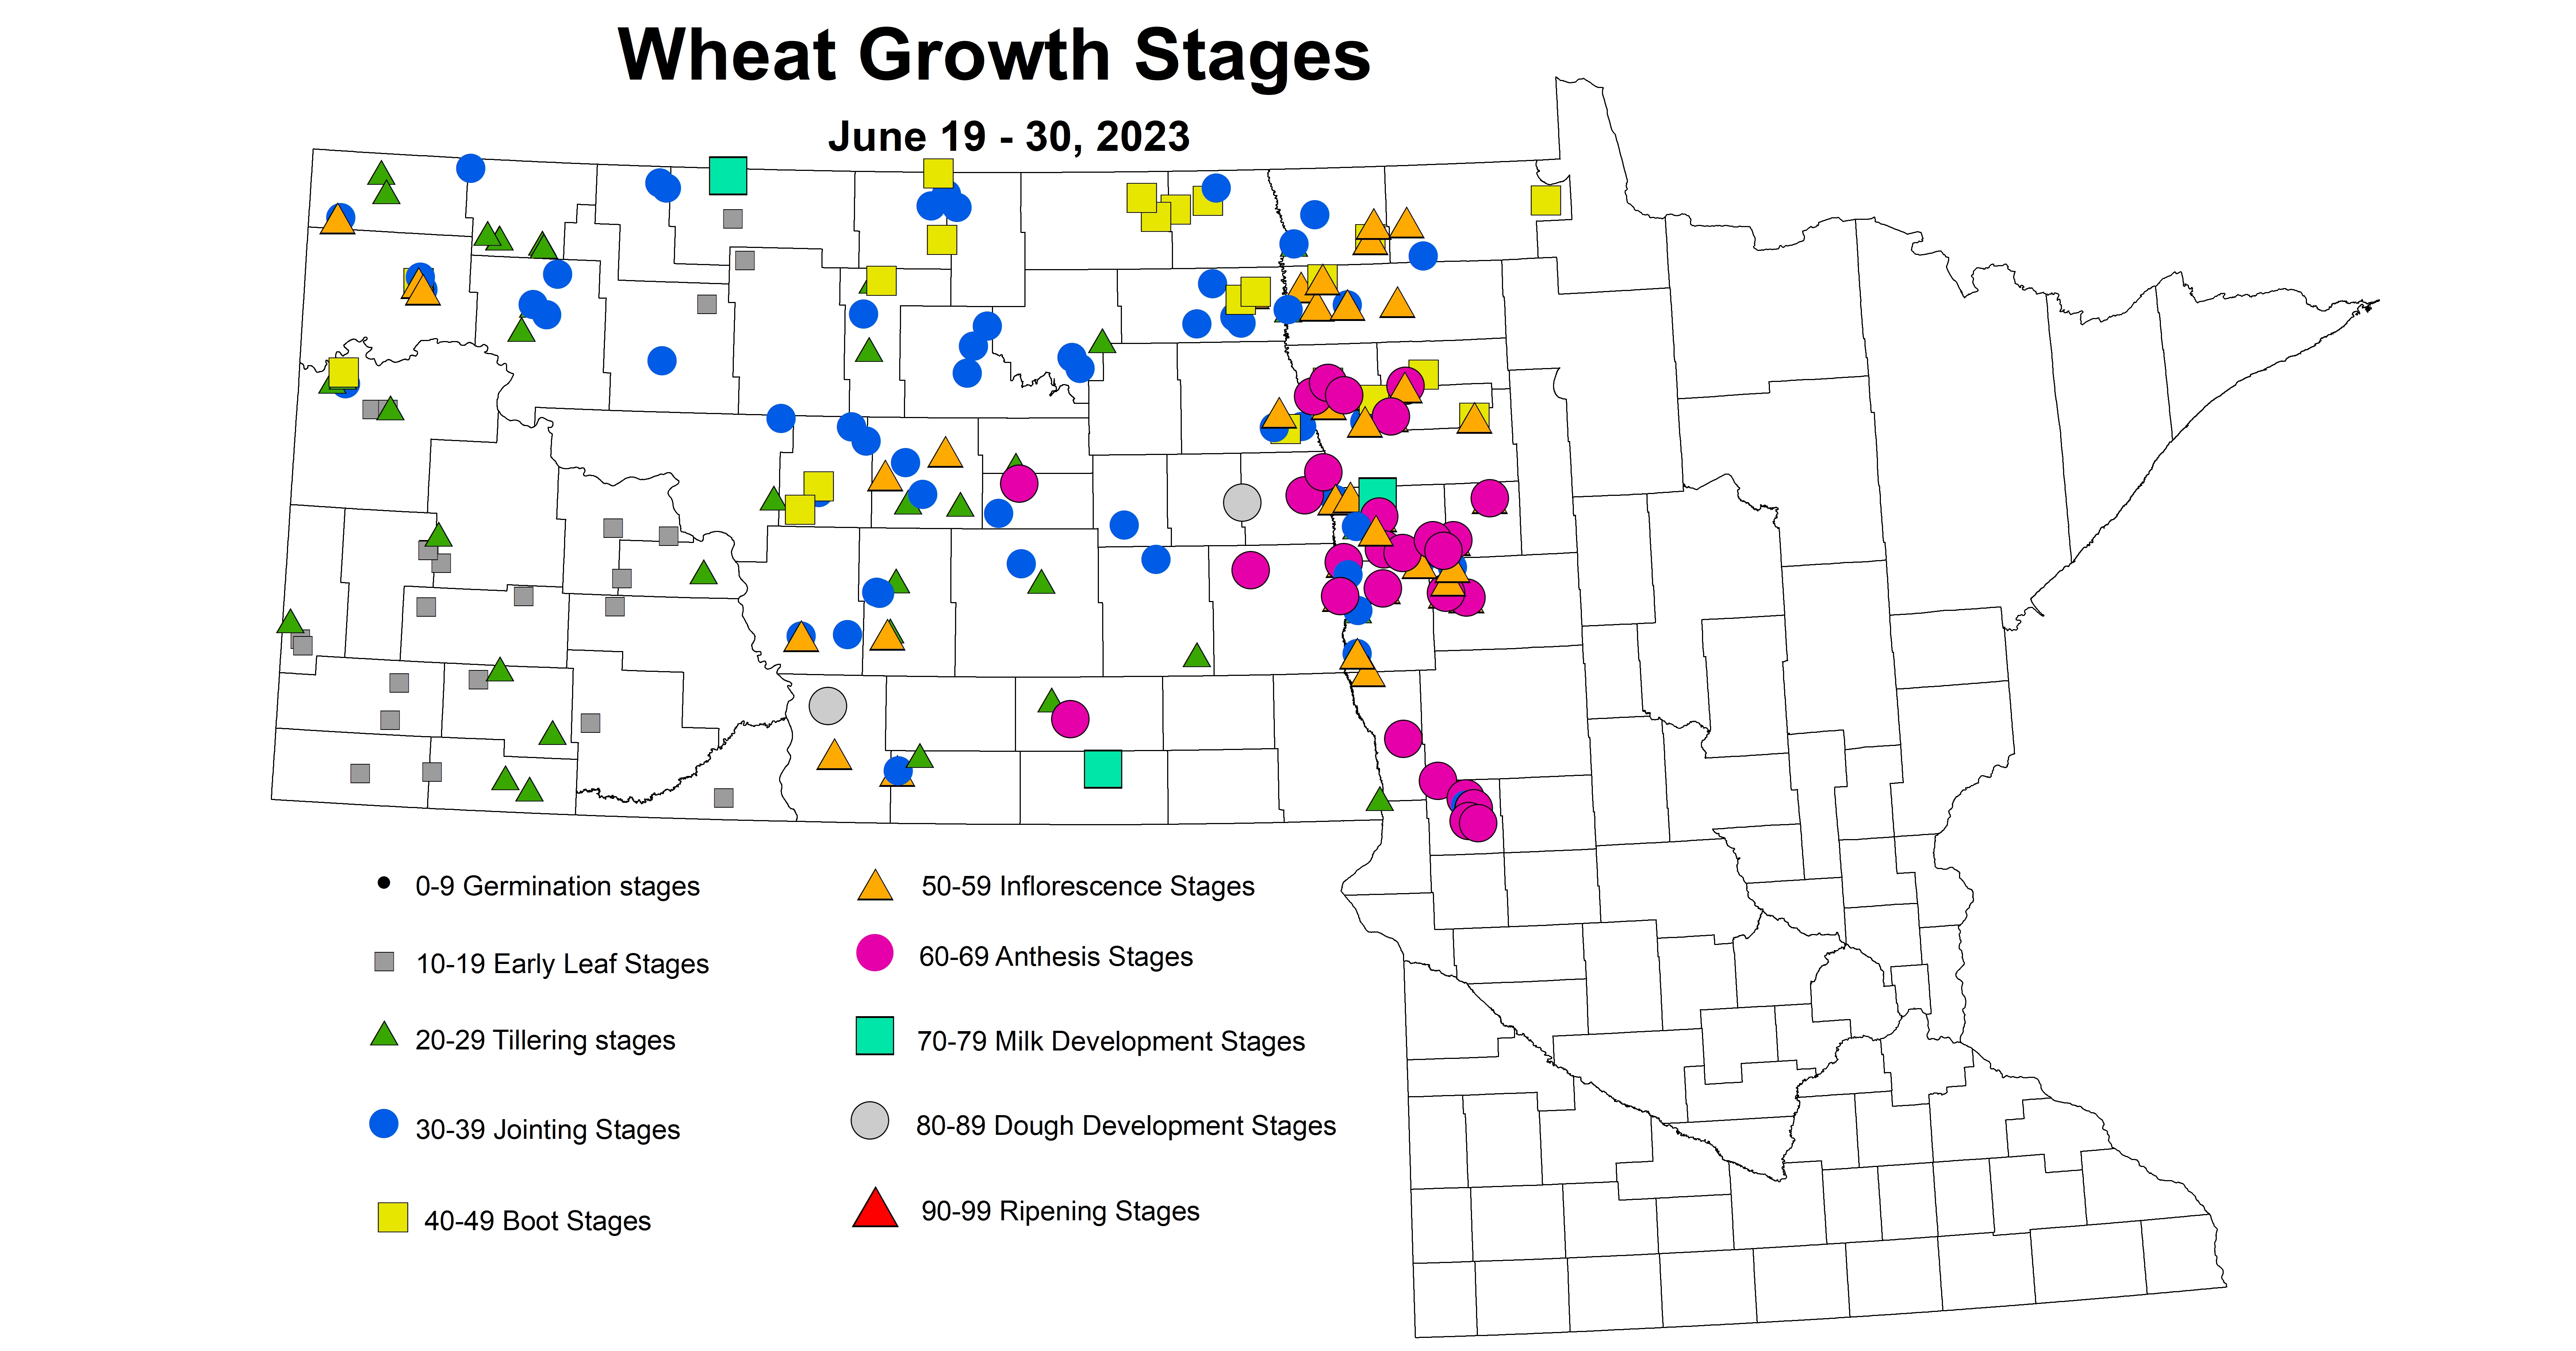 wheat growth stages June 19-30 2023